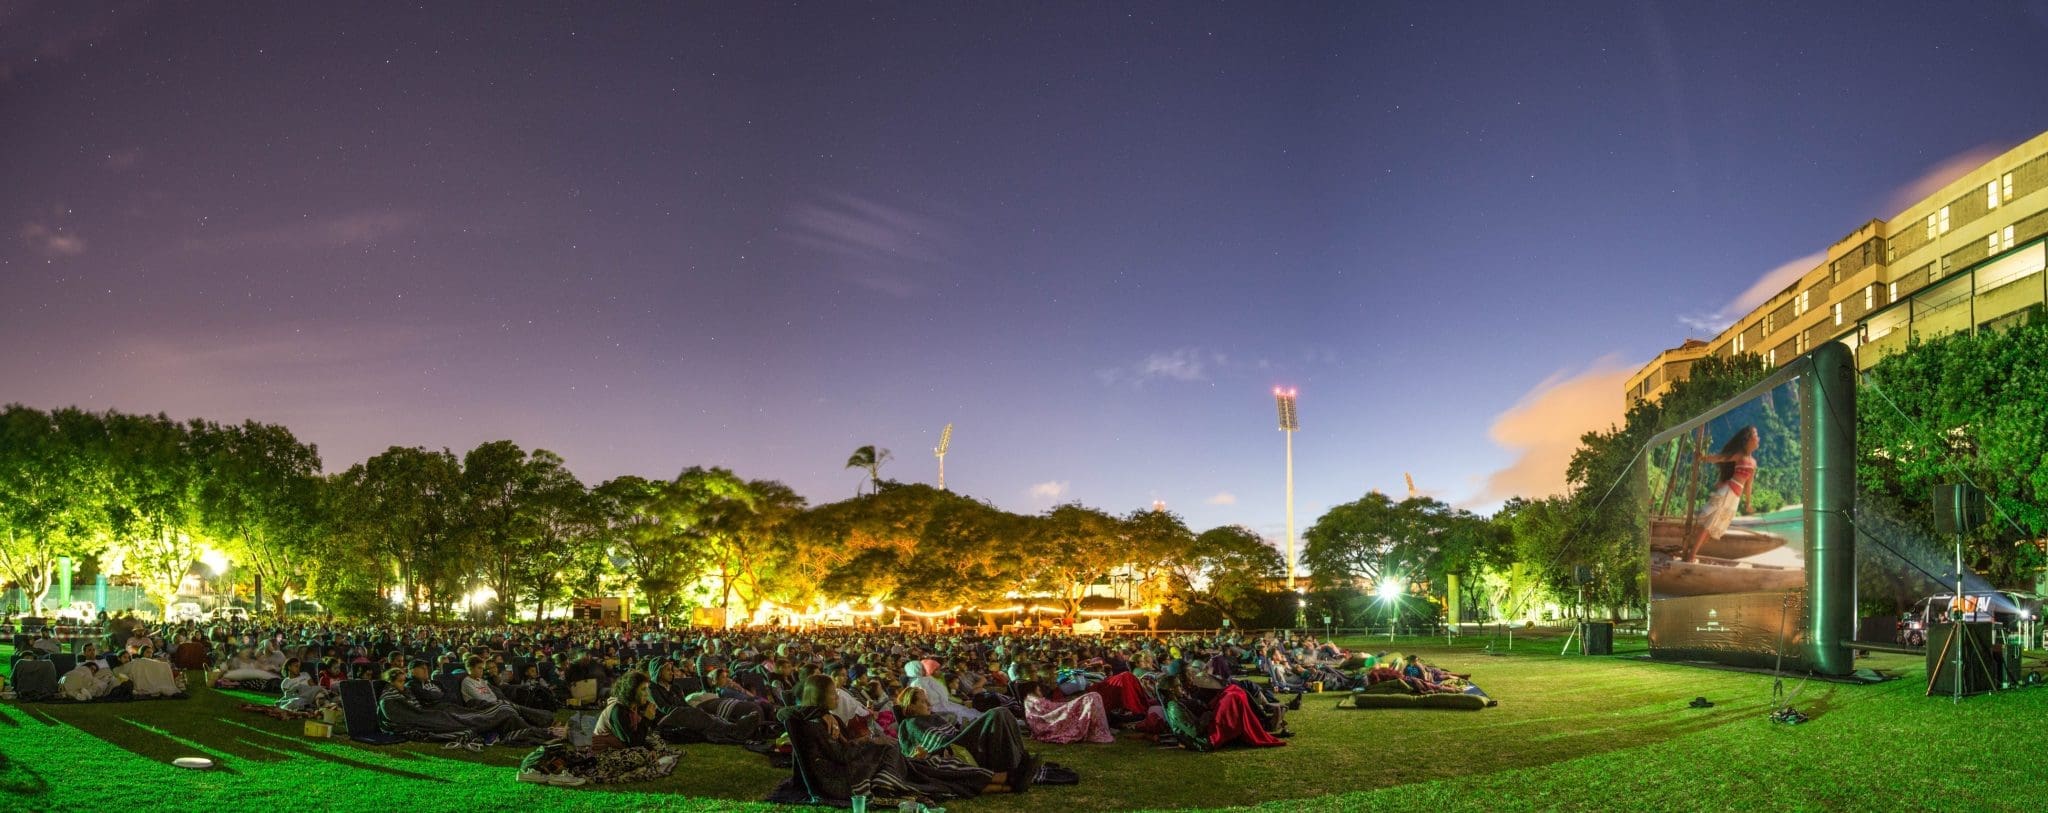 Win Tickets To A Screening At The Galileo Open Air Cinema Eat Play